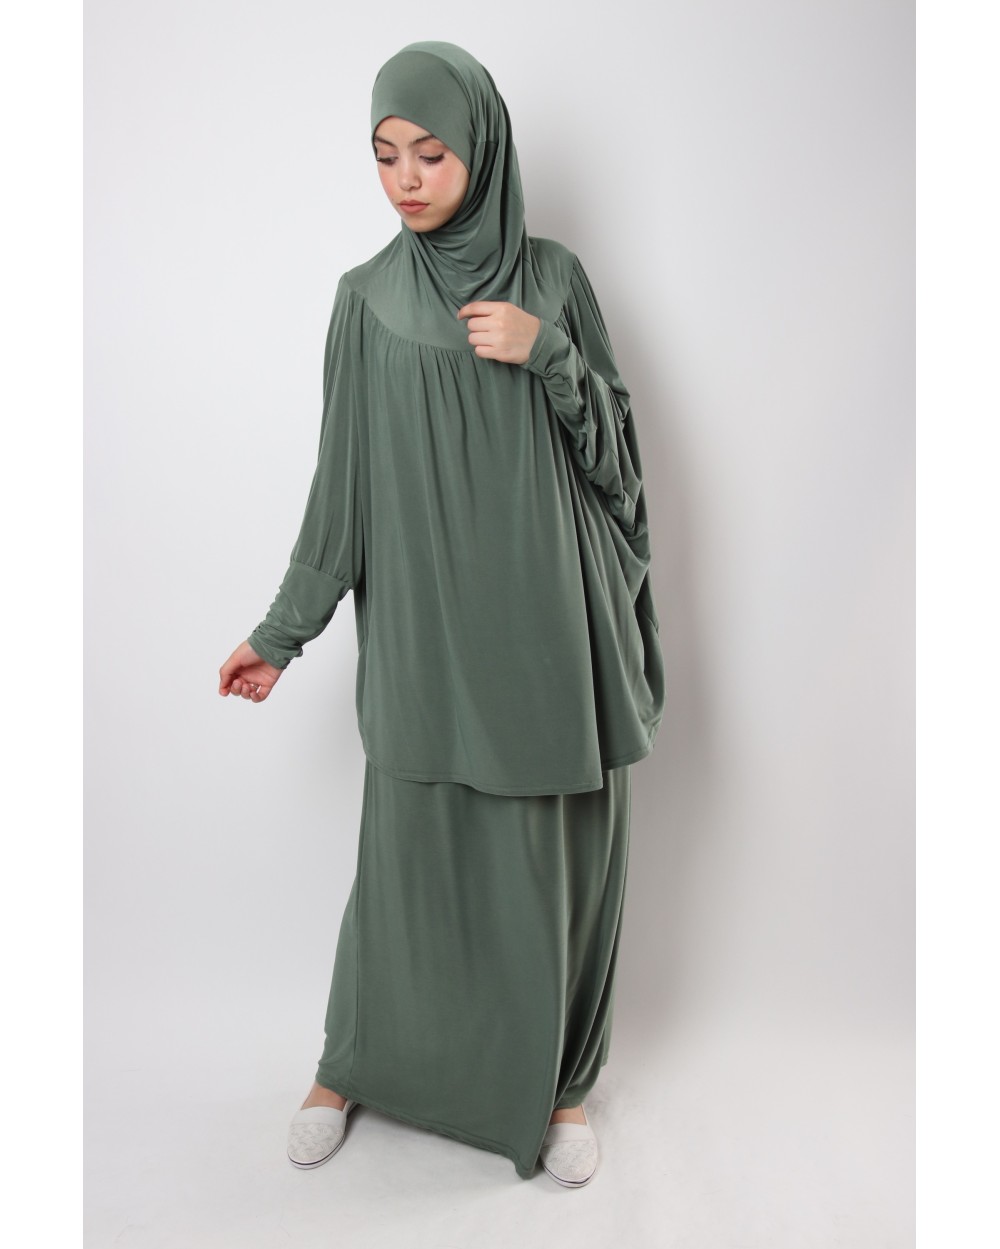 Jilbab style cape and skirt